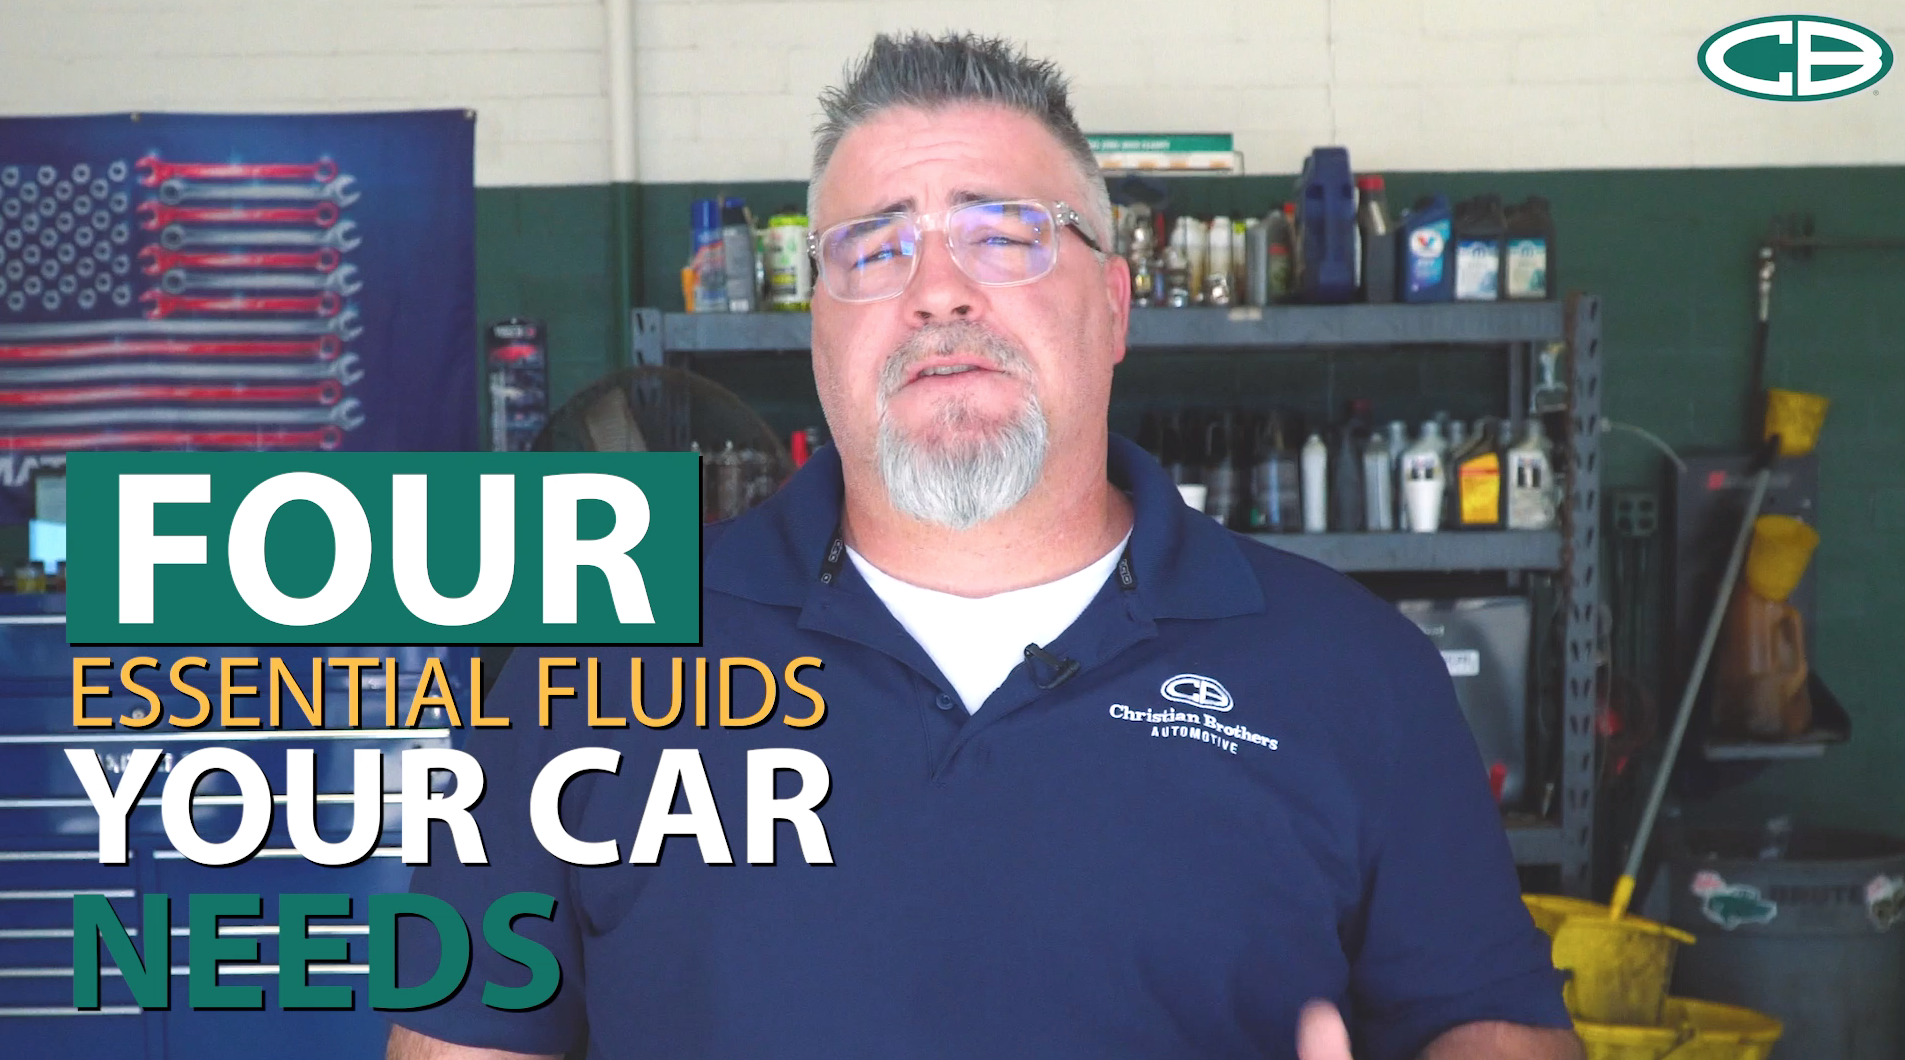 Car Talk: Essential Fluids your Car Needs and Why